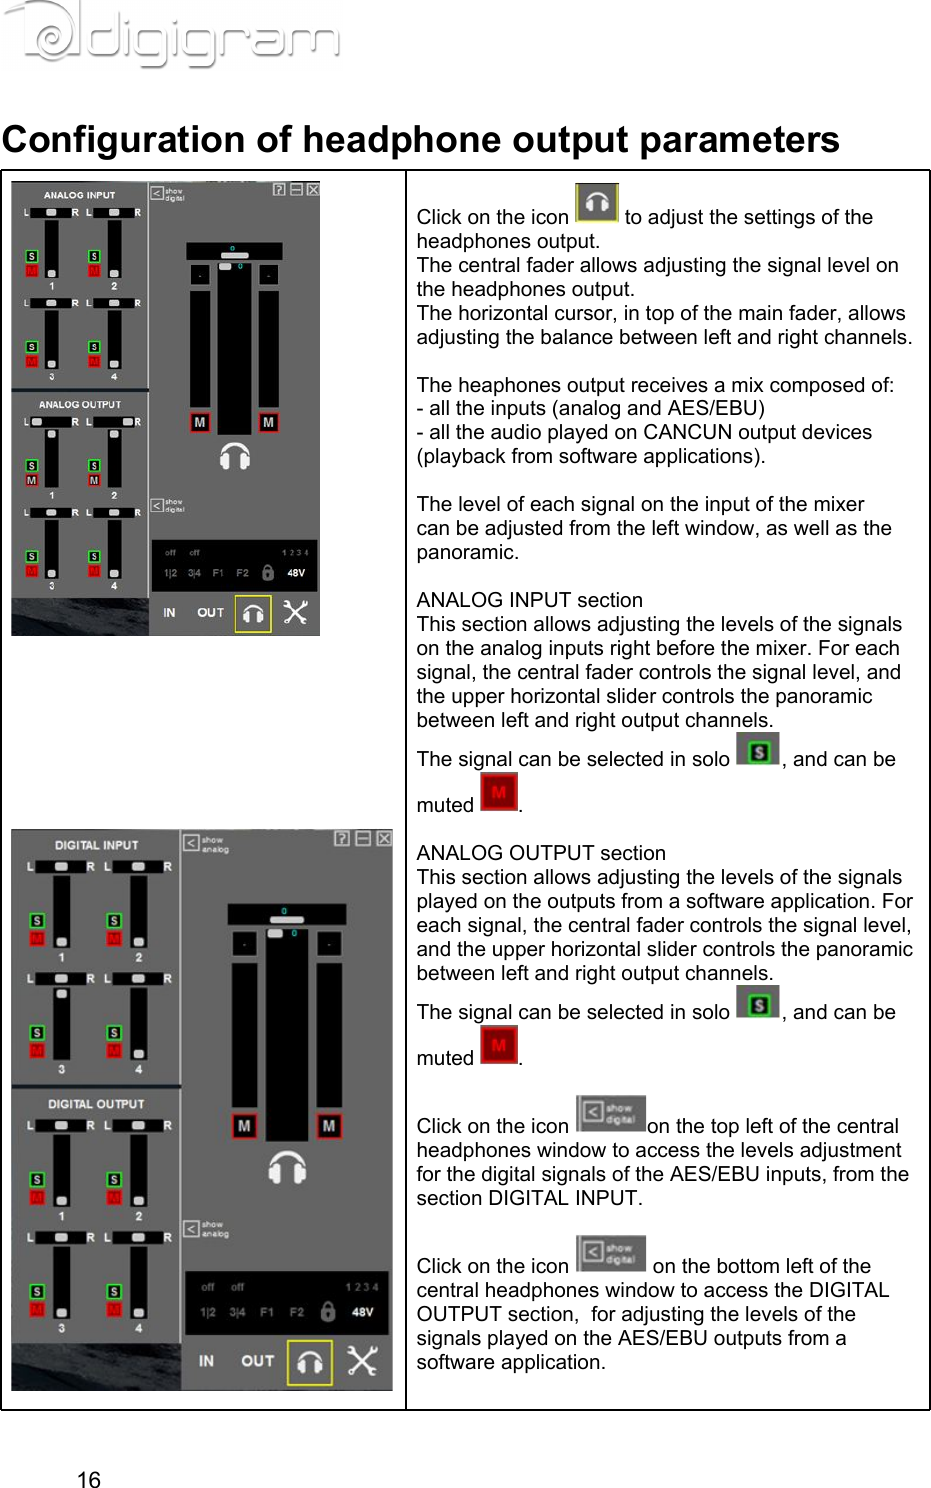 Configuration of headphone output parameters                Click on the icon   to adjust the settings of the headphones output.The central fader allows adjusting the signal level on the headphones output.The horizontal cursor, in top of the main fader, allows adjusting the balance between left and right channels.  The heaphones output receives a mix composed of:- all the inputs (analog and AES/EBU)- all the audio played on CANCUN output devices (playback from software applications).  The level of each signal on the input of the mixer can be adjusted from the left window, as well as the panoramic.  ANALOG INPUT sectionThis section allows adjusting the levels of the signals on the analog inputs right before the mixer. For each signal, the central fader controls the signal level, and the upper horizontal slider controls the panoramic between left and right output channels.The signal can be selected in solo  , and can be muted  .  ANALOG OUTPUT sectionThis section allows adjusting the levels of the signals played on the outputs from a software application. For each signal, the central fader controls the signal level, and the upper horizontal slider controls the panoramic between left and right output channels.The signal can be selected in solo  , and can be muted  .  Click on the icon  on the top left of the central headphones window to access the levels adjustment for the digital signals of the AES/EBU inputs, from the section DIGITAL INPUT. Click on the icon   on the bottom left of the central headphones window to access the DIGITAL OUTPUT section,  for adjusting the levels of the signals played on the AES/EBU outputs from a software application.  16